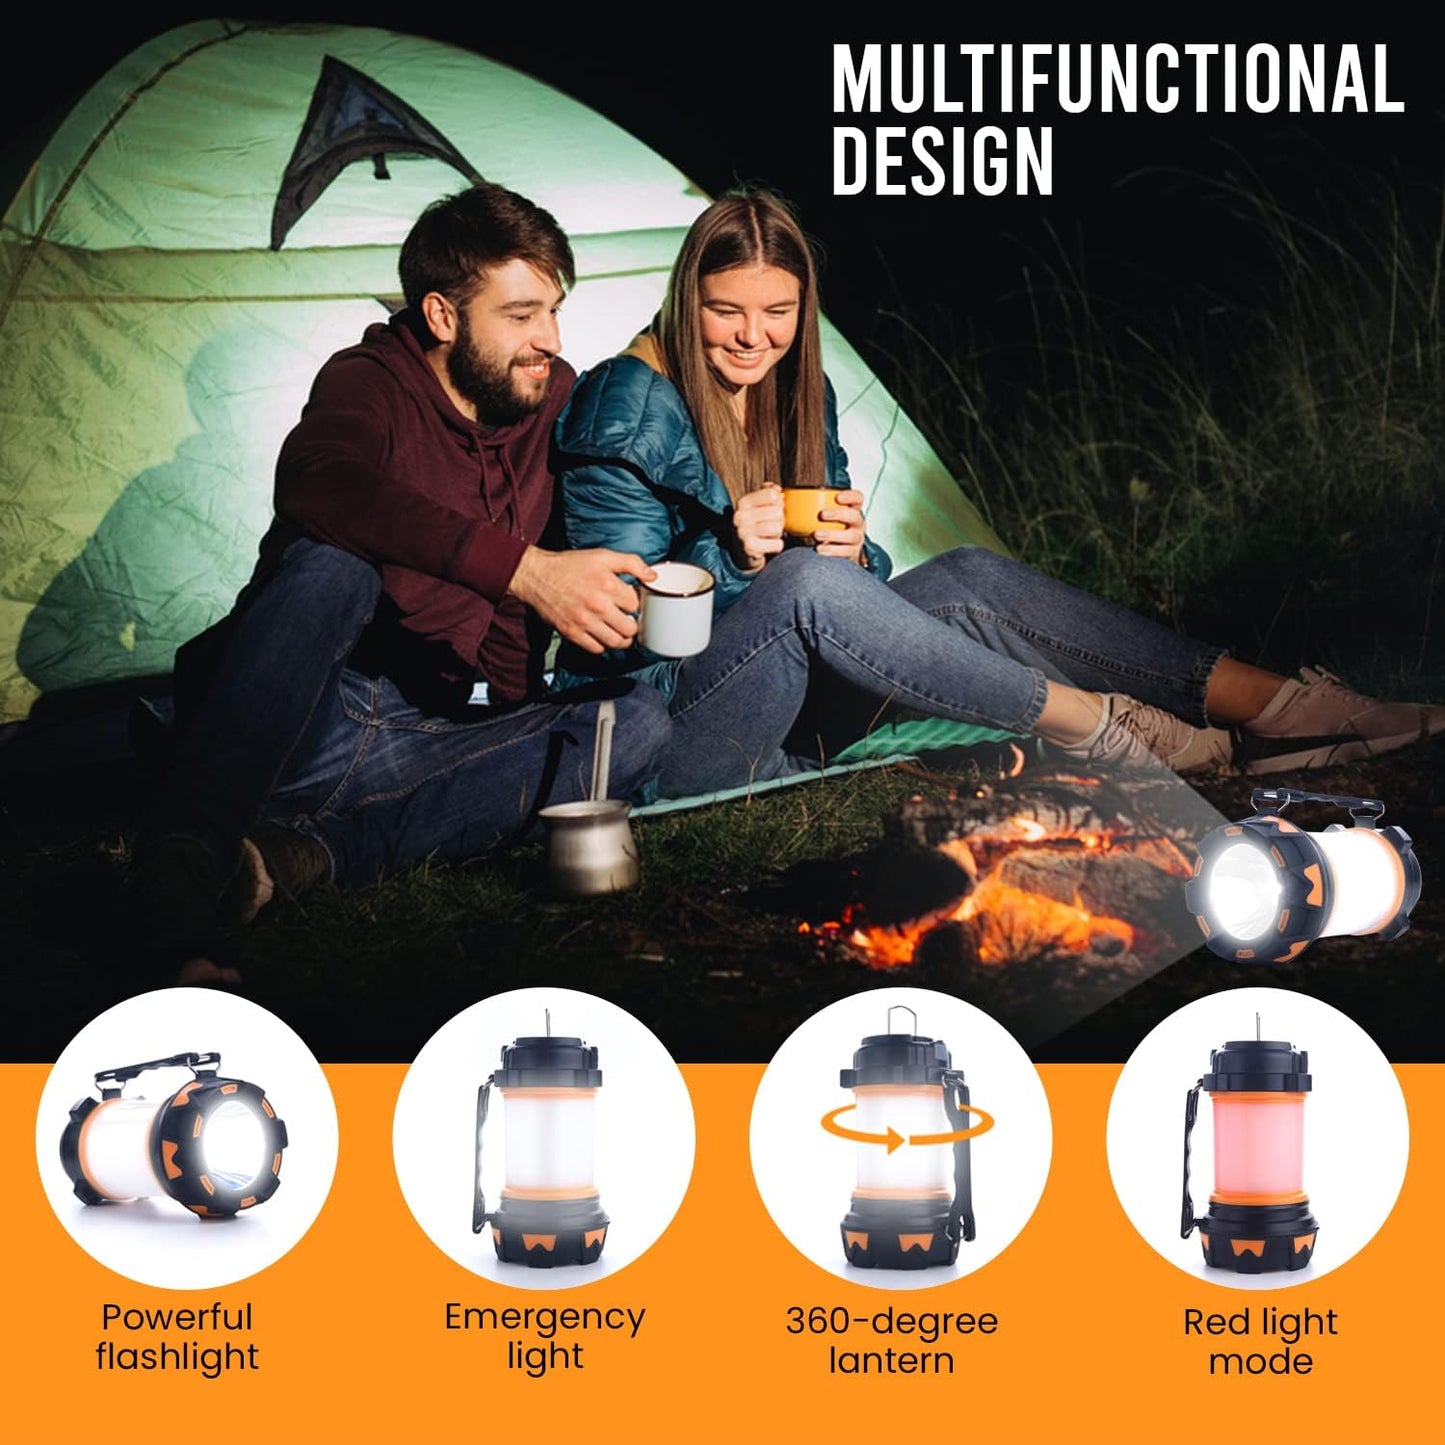 AYL LED Camping Lantern Rechargeable, Camping Flashlight 8 Light Modes, 4800mAh Power Bank, Waterproof, Lantern Flashlight for Emergency, Hurricane, Power Outages, USB Cable with Tripod Included